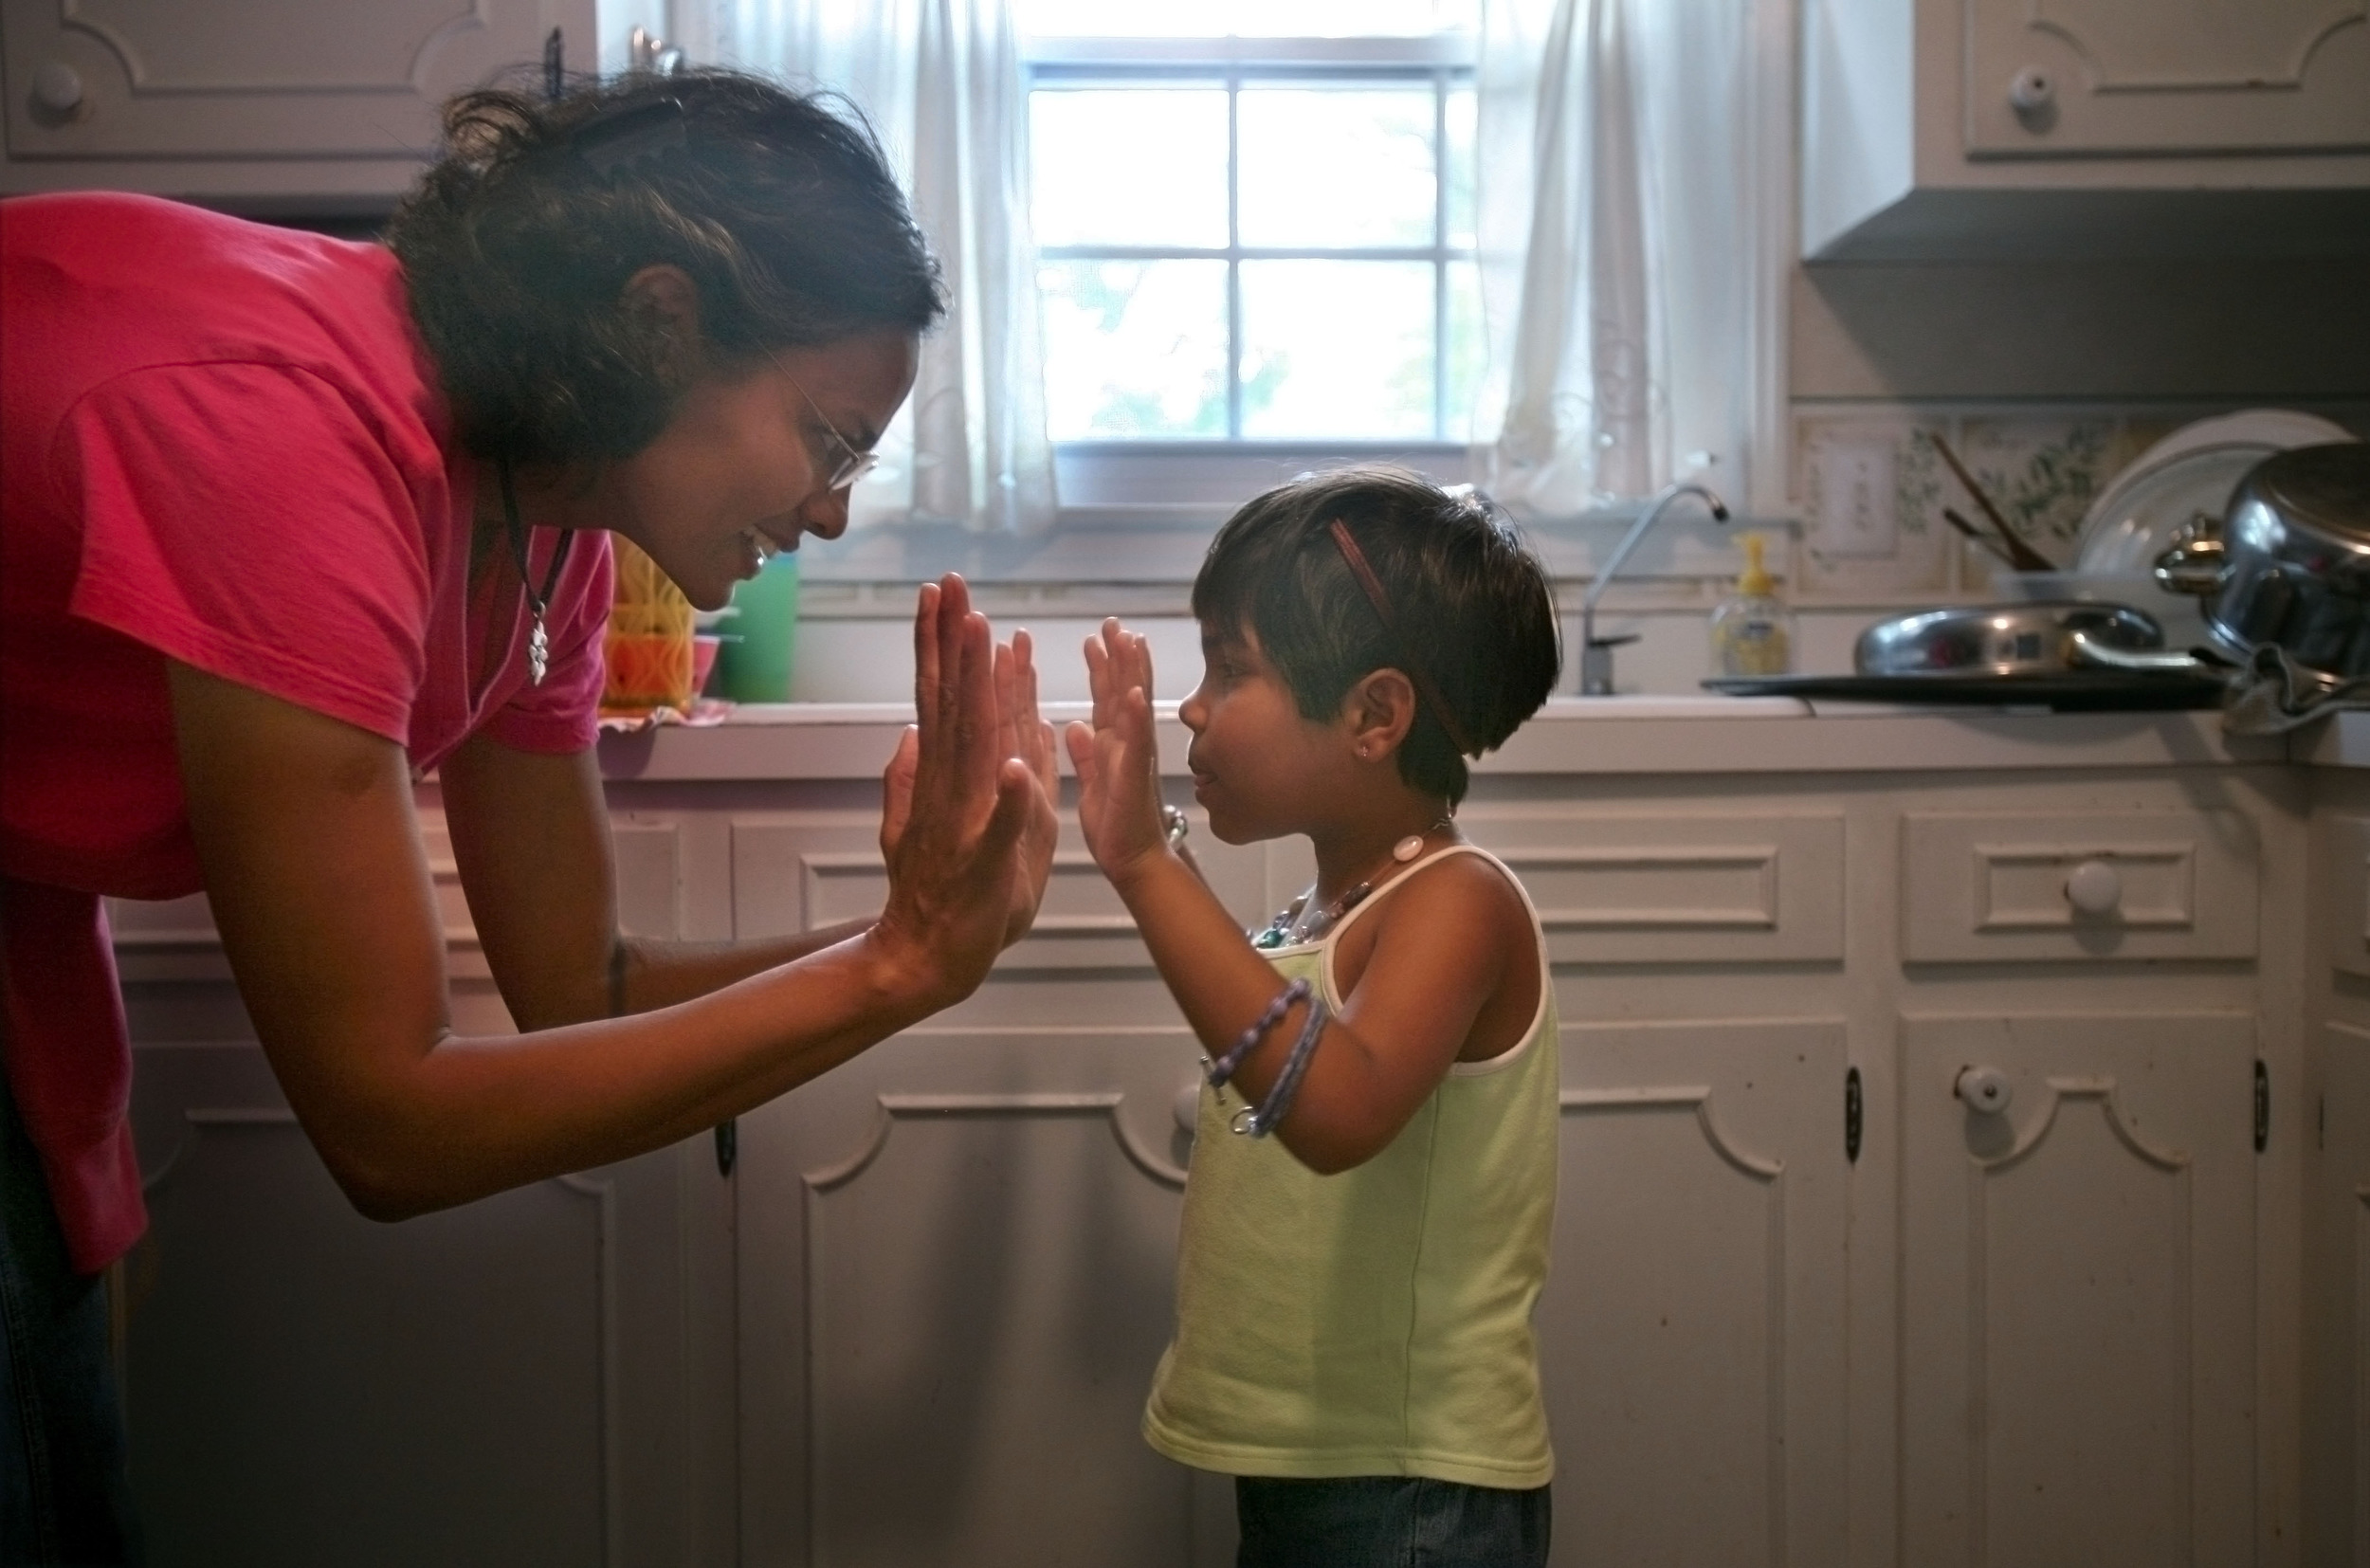  Karthi Masters gives Kajal a high five after she helped with the dishes Wednesday, May 30, 2007 in Franklin, Tenn. Kajal had developed a bond with Karthi and the Masters family. 